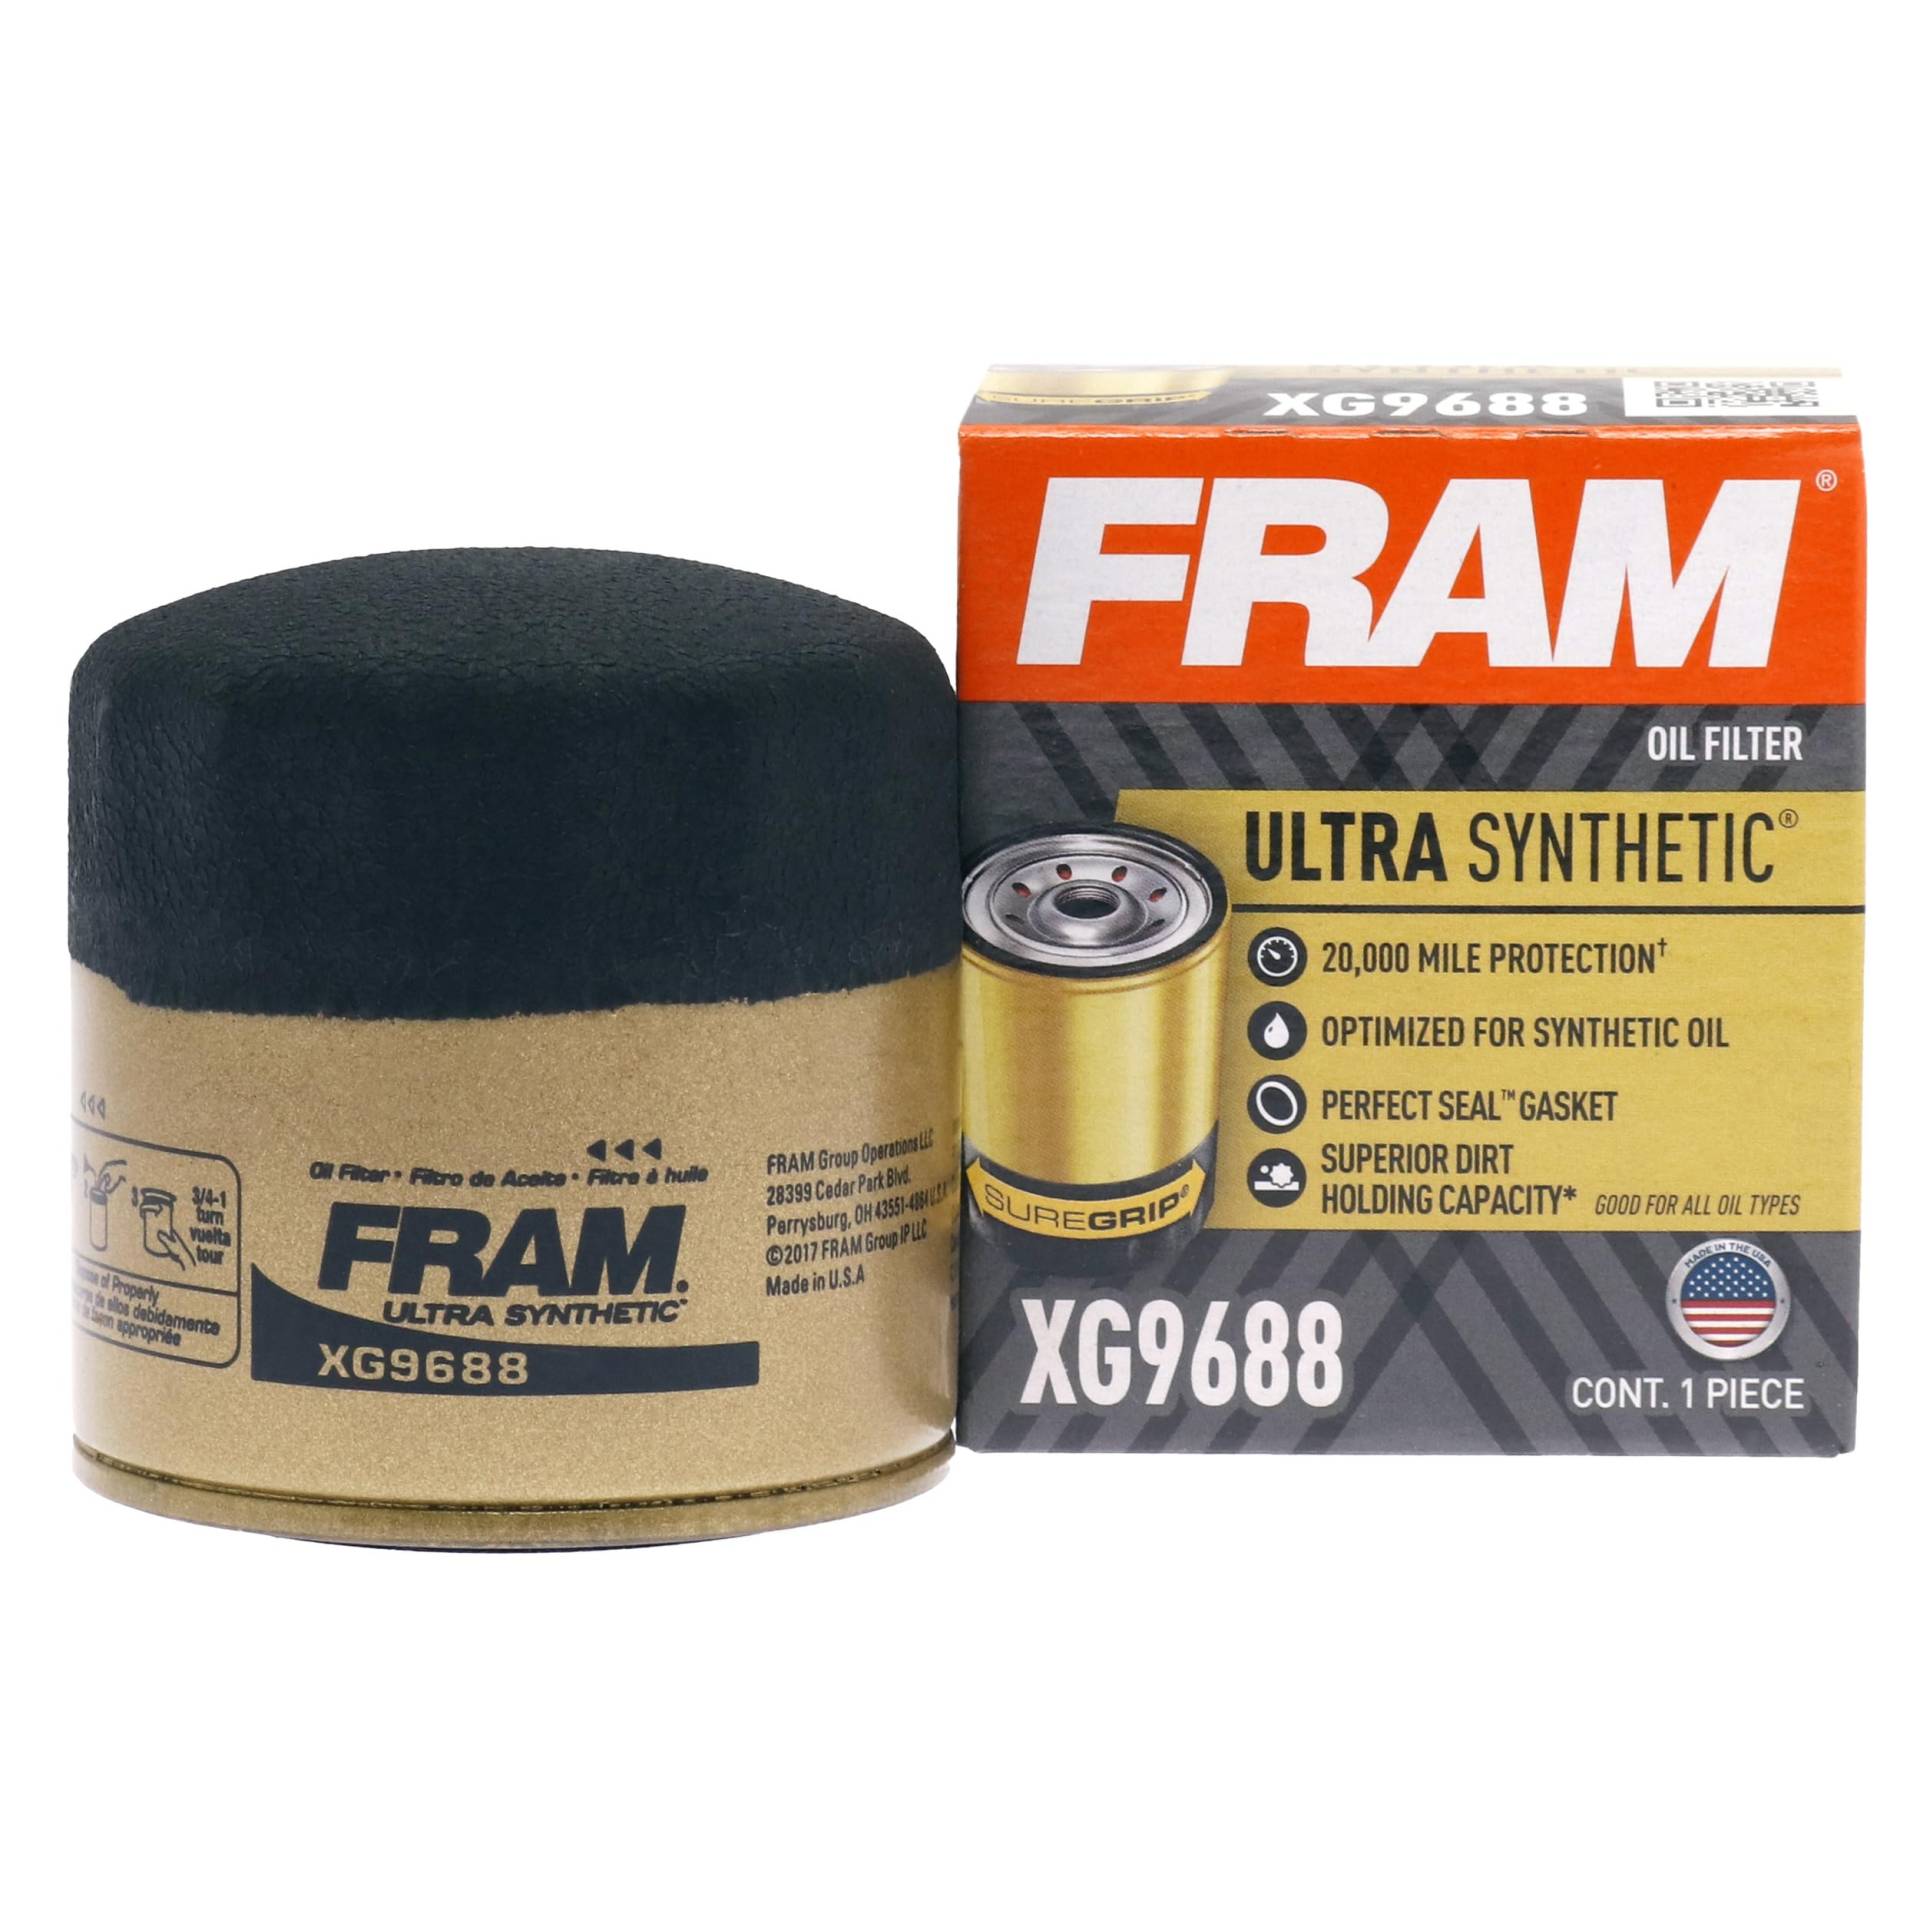 FRAM Ultra Synthetic 20.000 Mile Protection Oil Filter XG9688 with SureGrip (1 Stück) von Fram